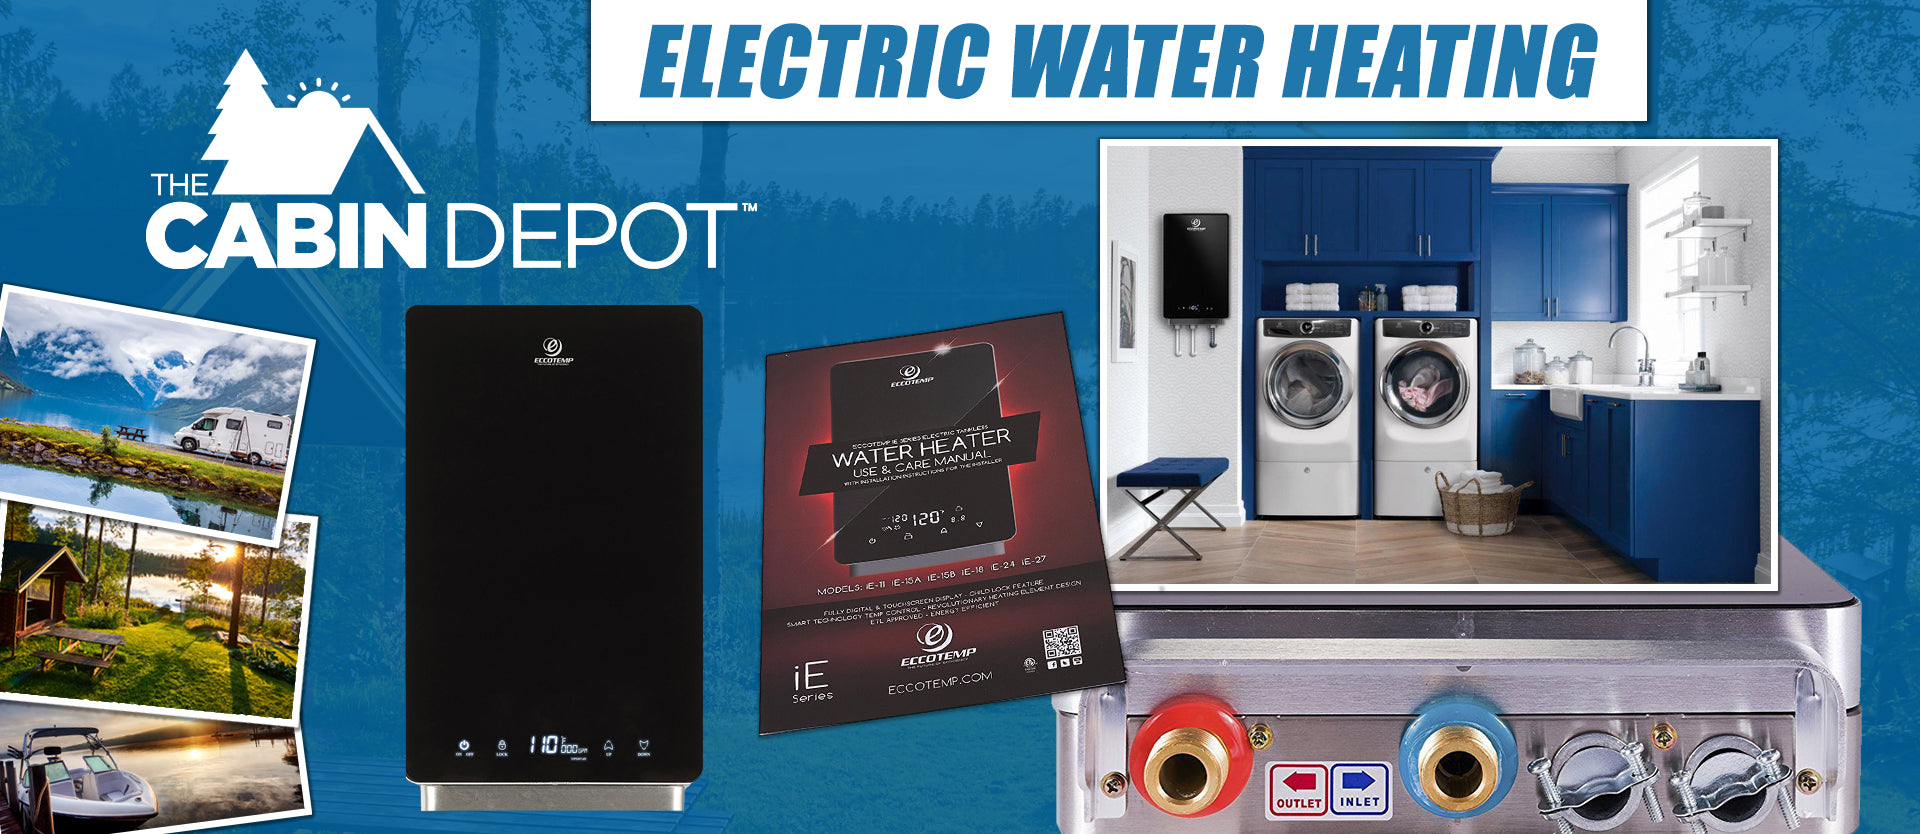 Electric Water Heating The Cabin Depot ™ Canada